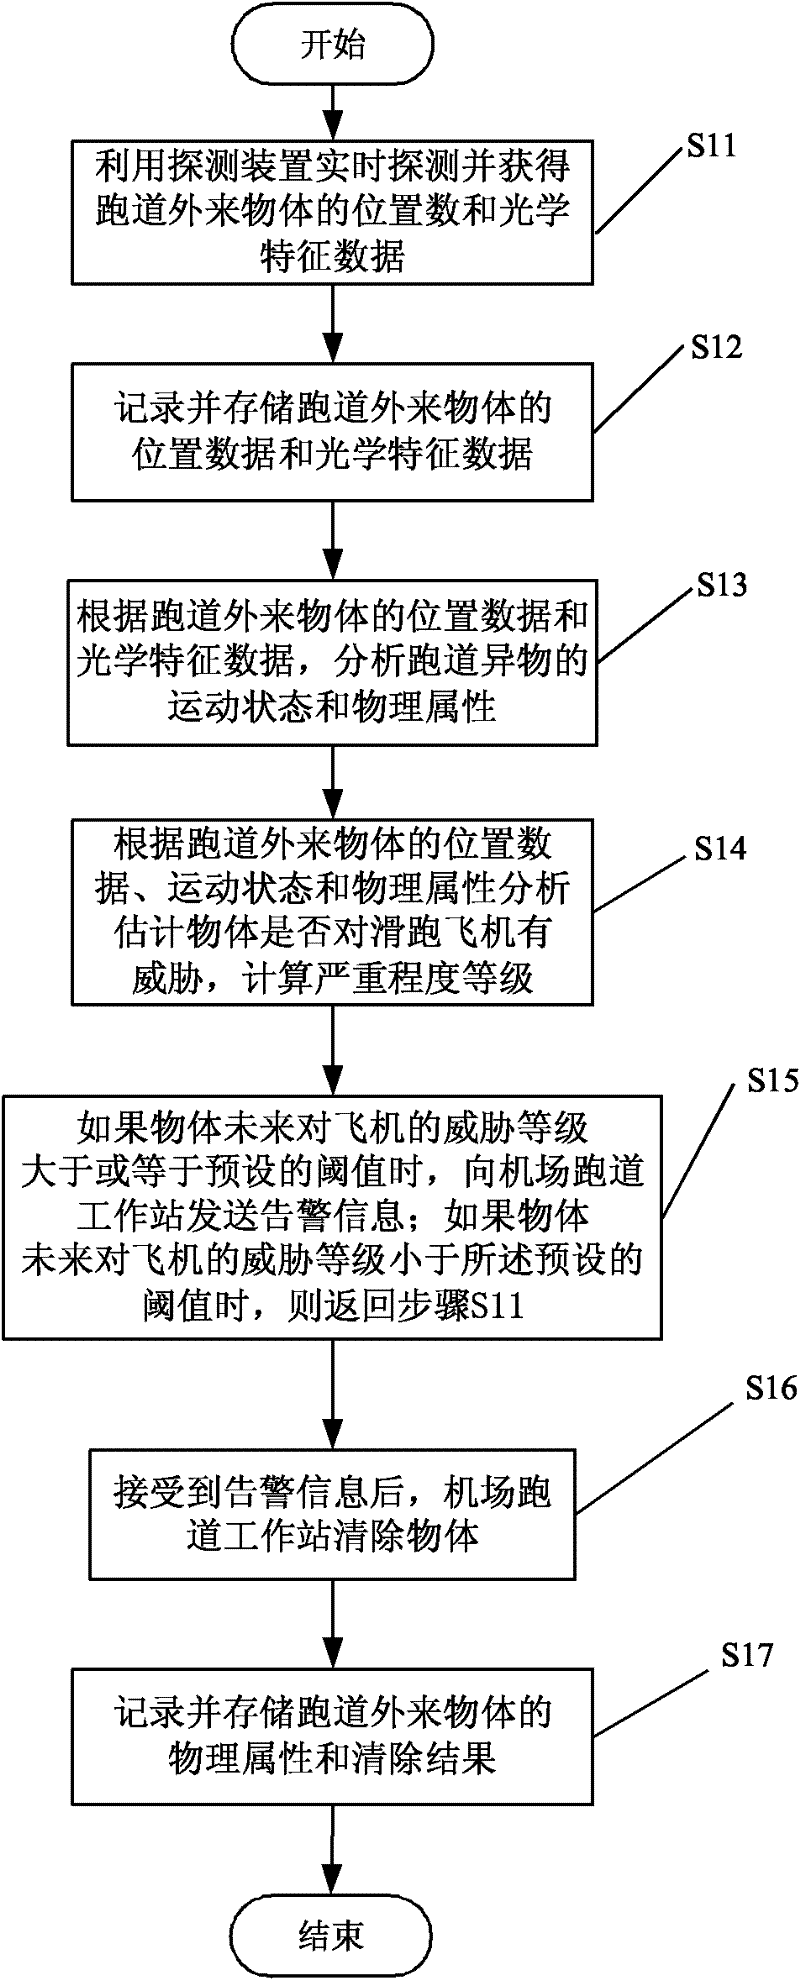 System and method for automatically detecting foreign object debris (FOD) on airfield runways